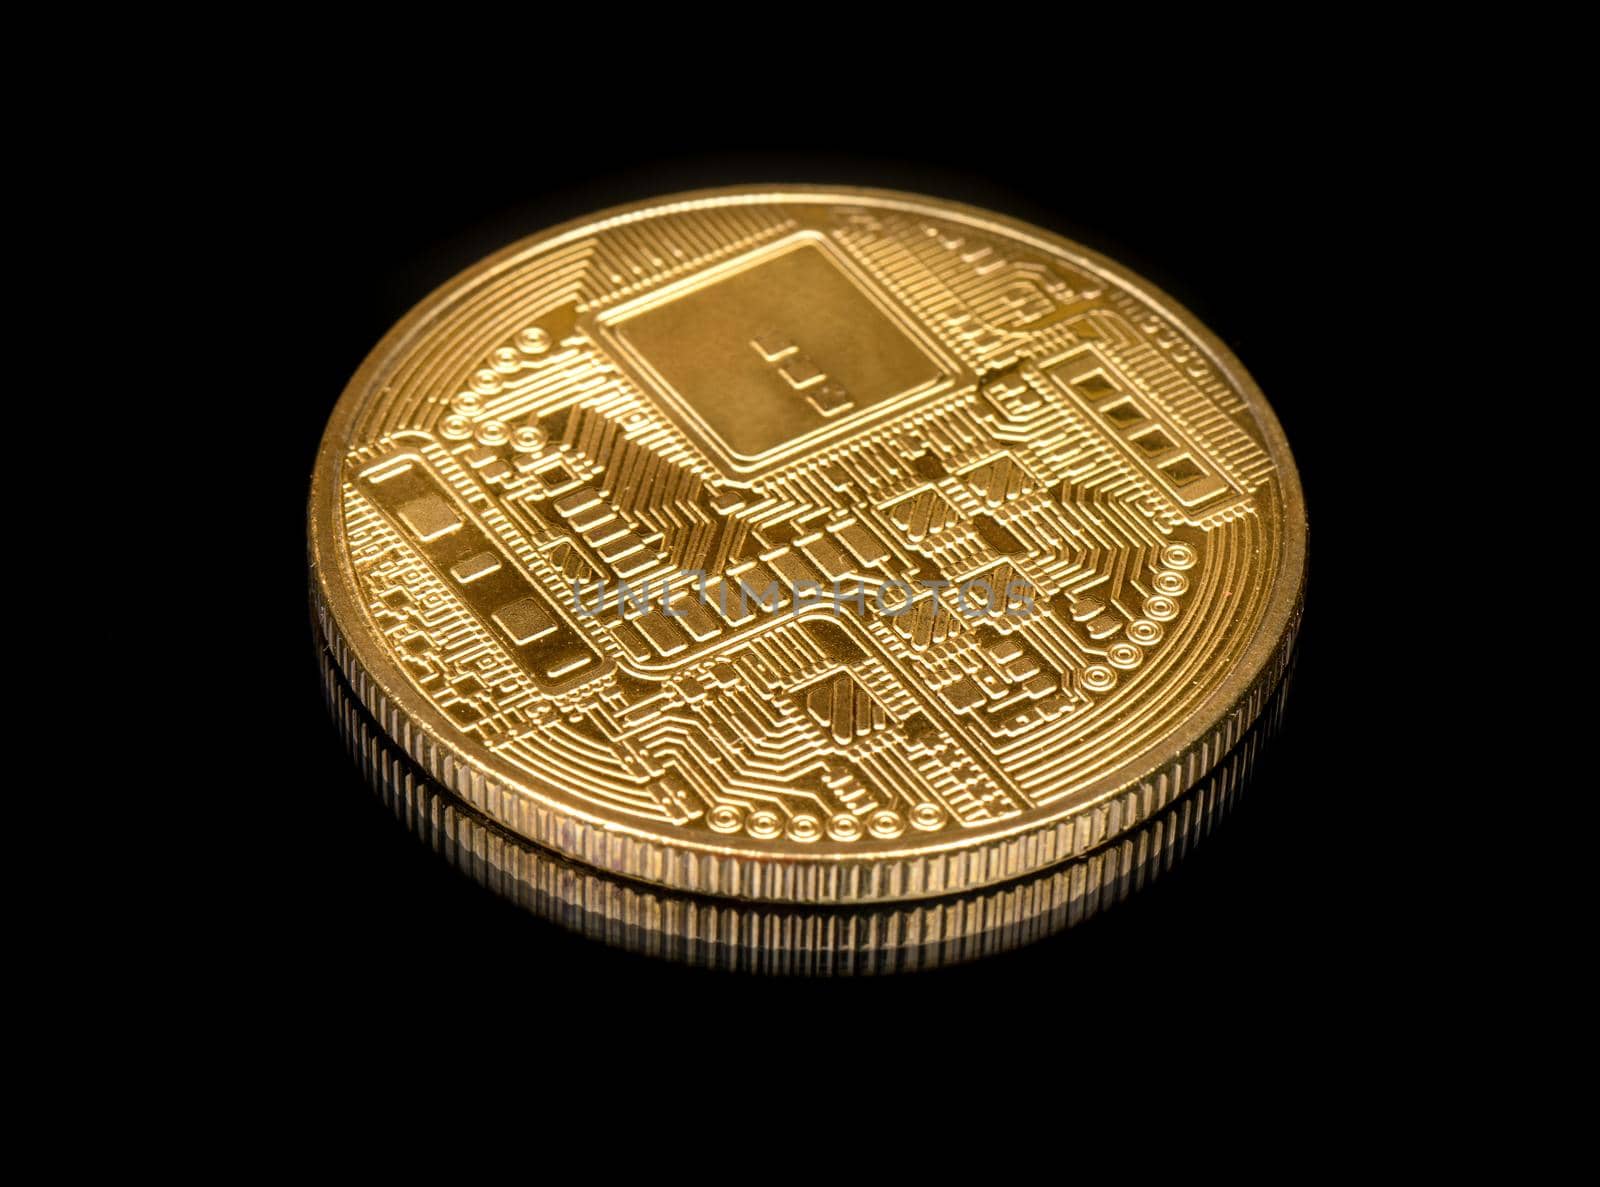 Back side of the Golden coin bitcoin on black background